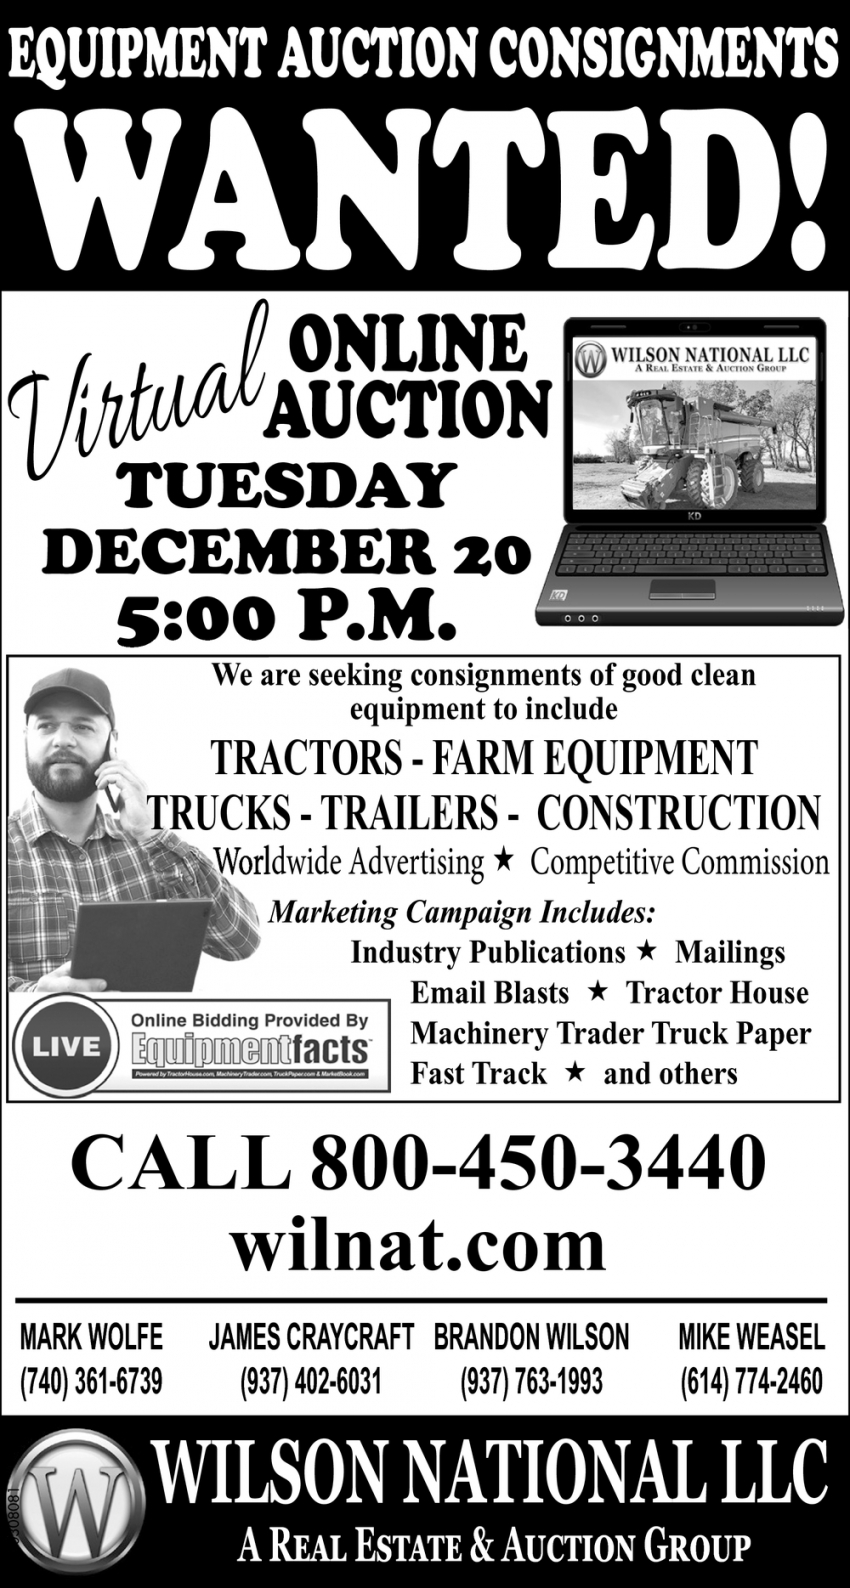 Equipment Auction Consignments Wanted!